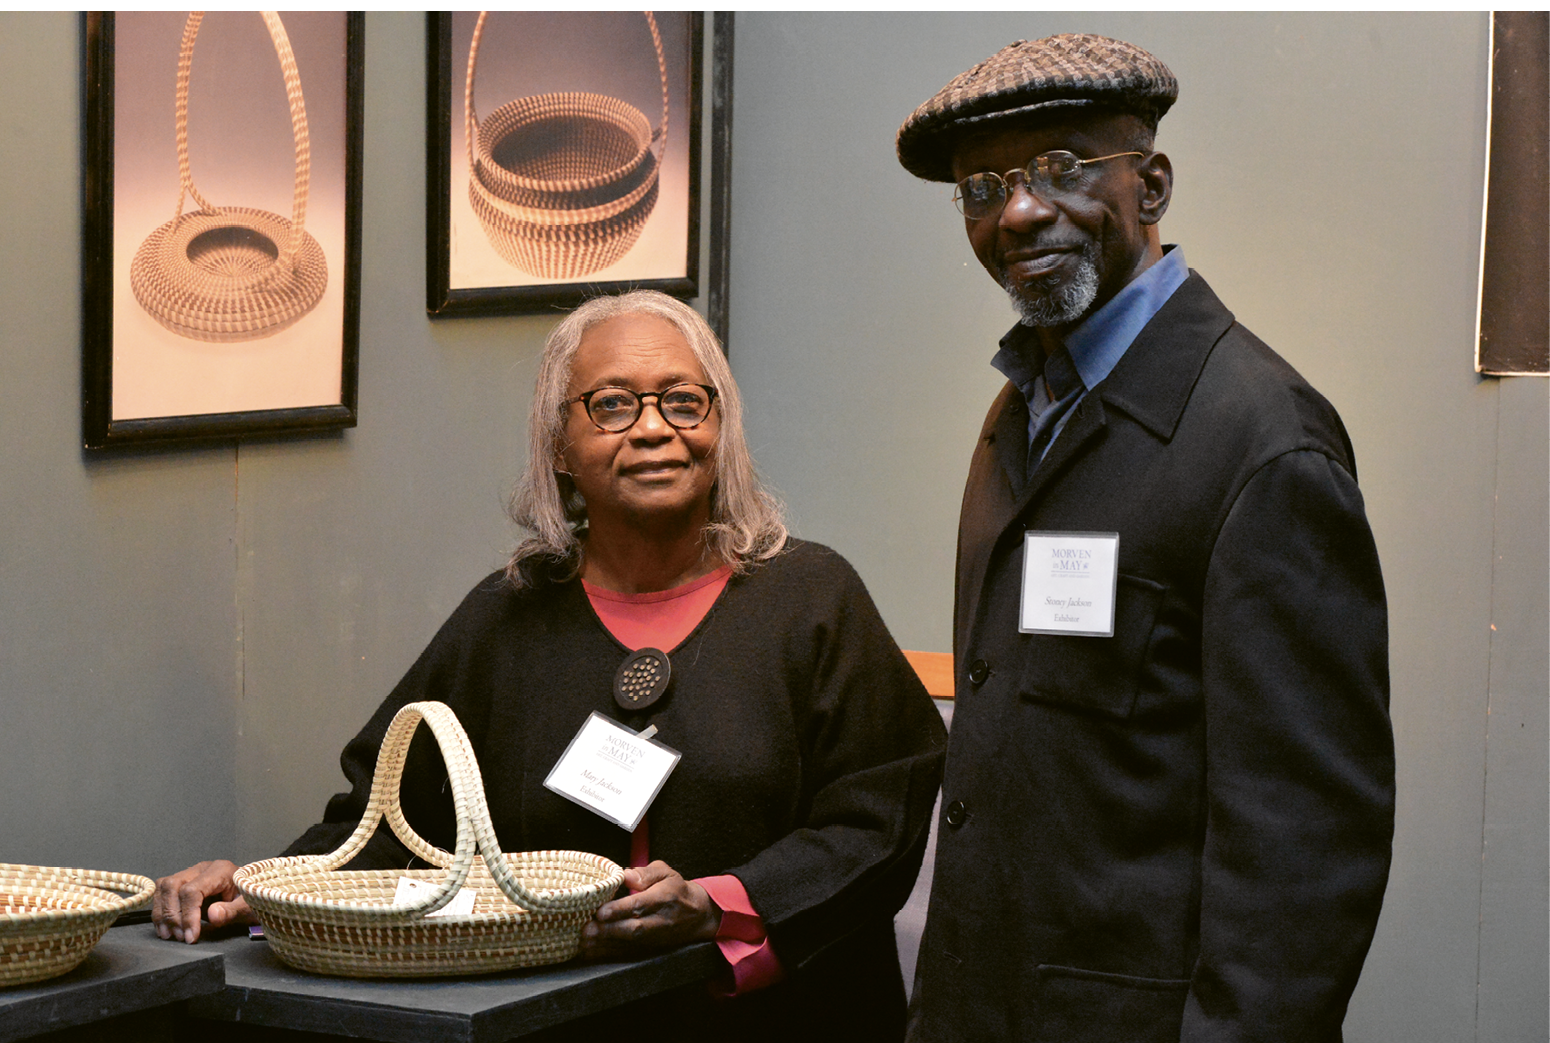 Family Enterprise: Jackson credits her husband, Stoney, who specializes in bulrush baskets, for suggesting design ideas. He also harvests her materials and has been a steady presence throughout her career.